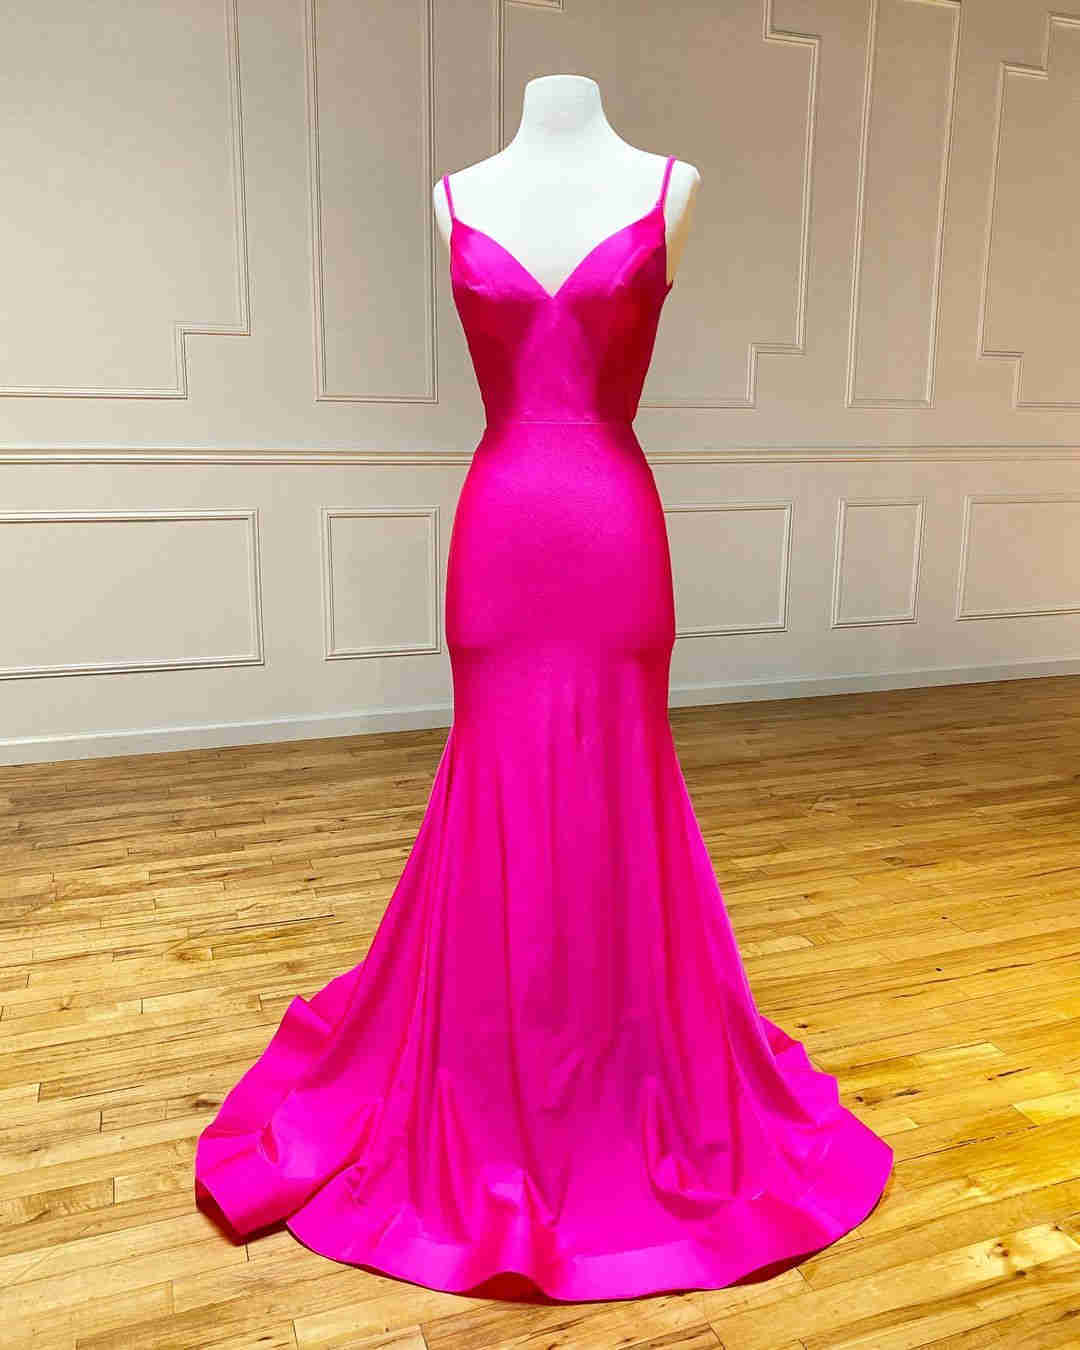 Simple Spaghtti Straps Hot Pink Long Prom Dress Simple Spaghtti Straps Hot Pink Long Prom Dress long dress,cheap dress,evening dress,bridal dress,prom dress 2021